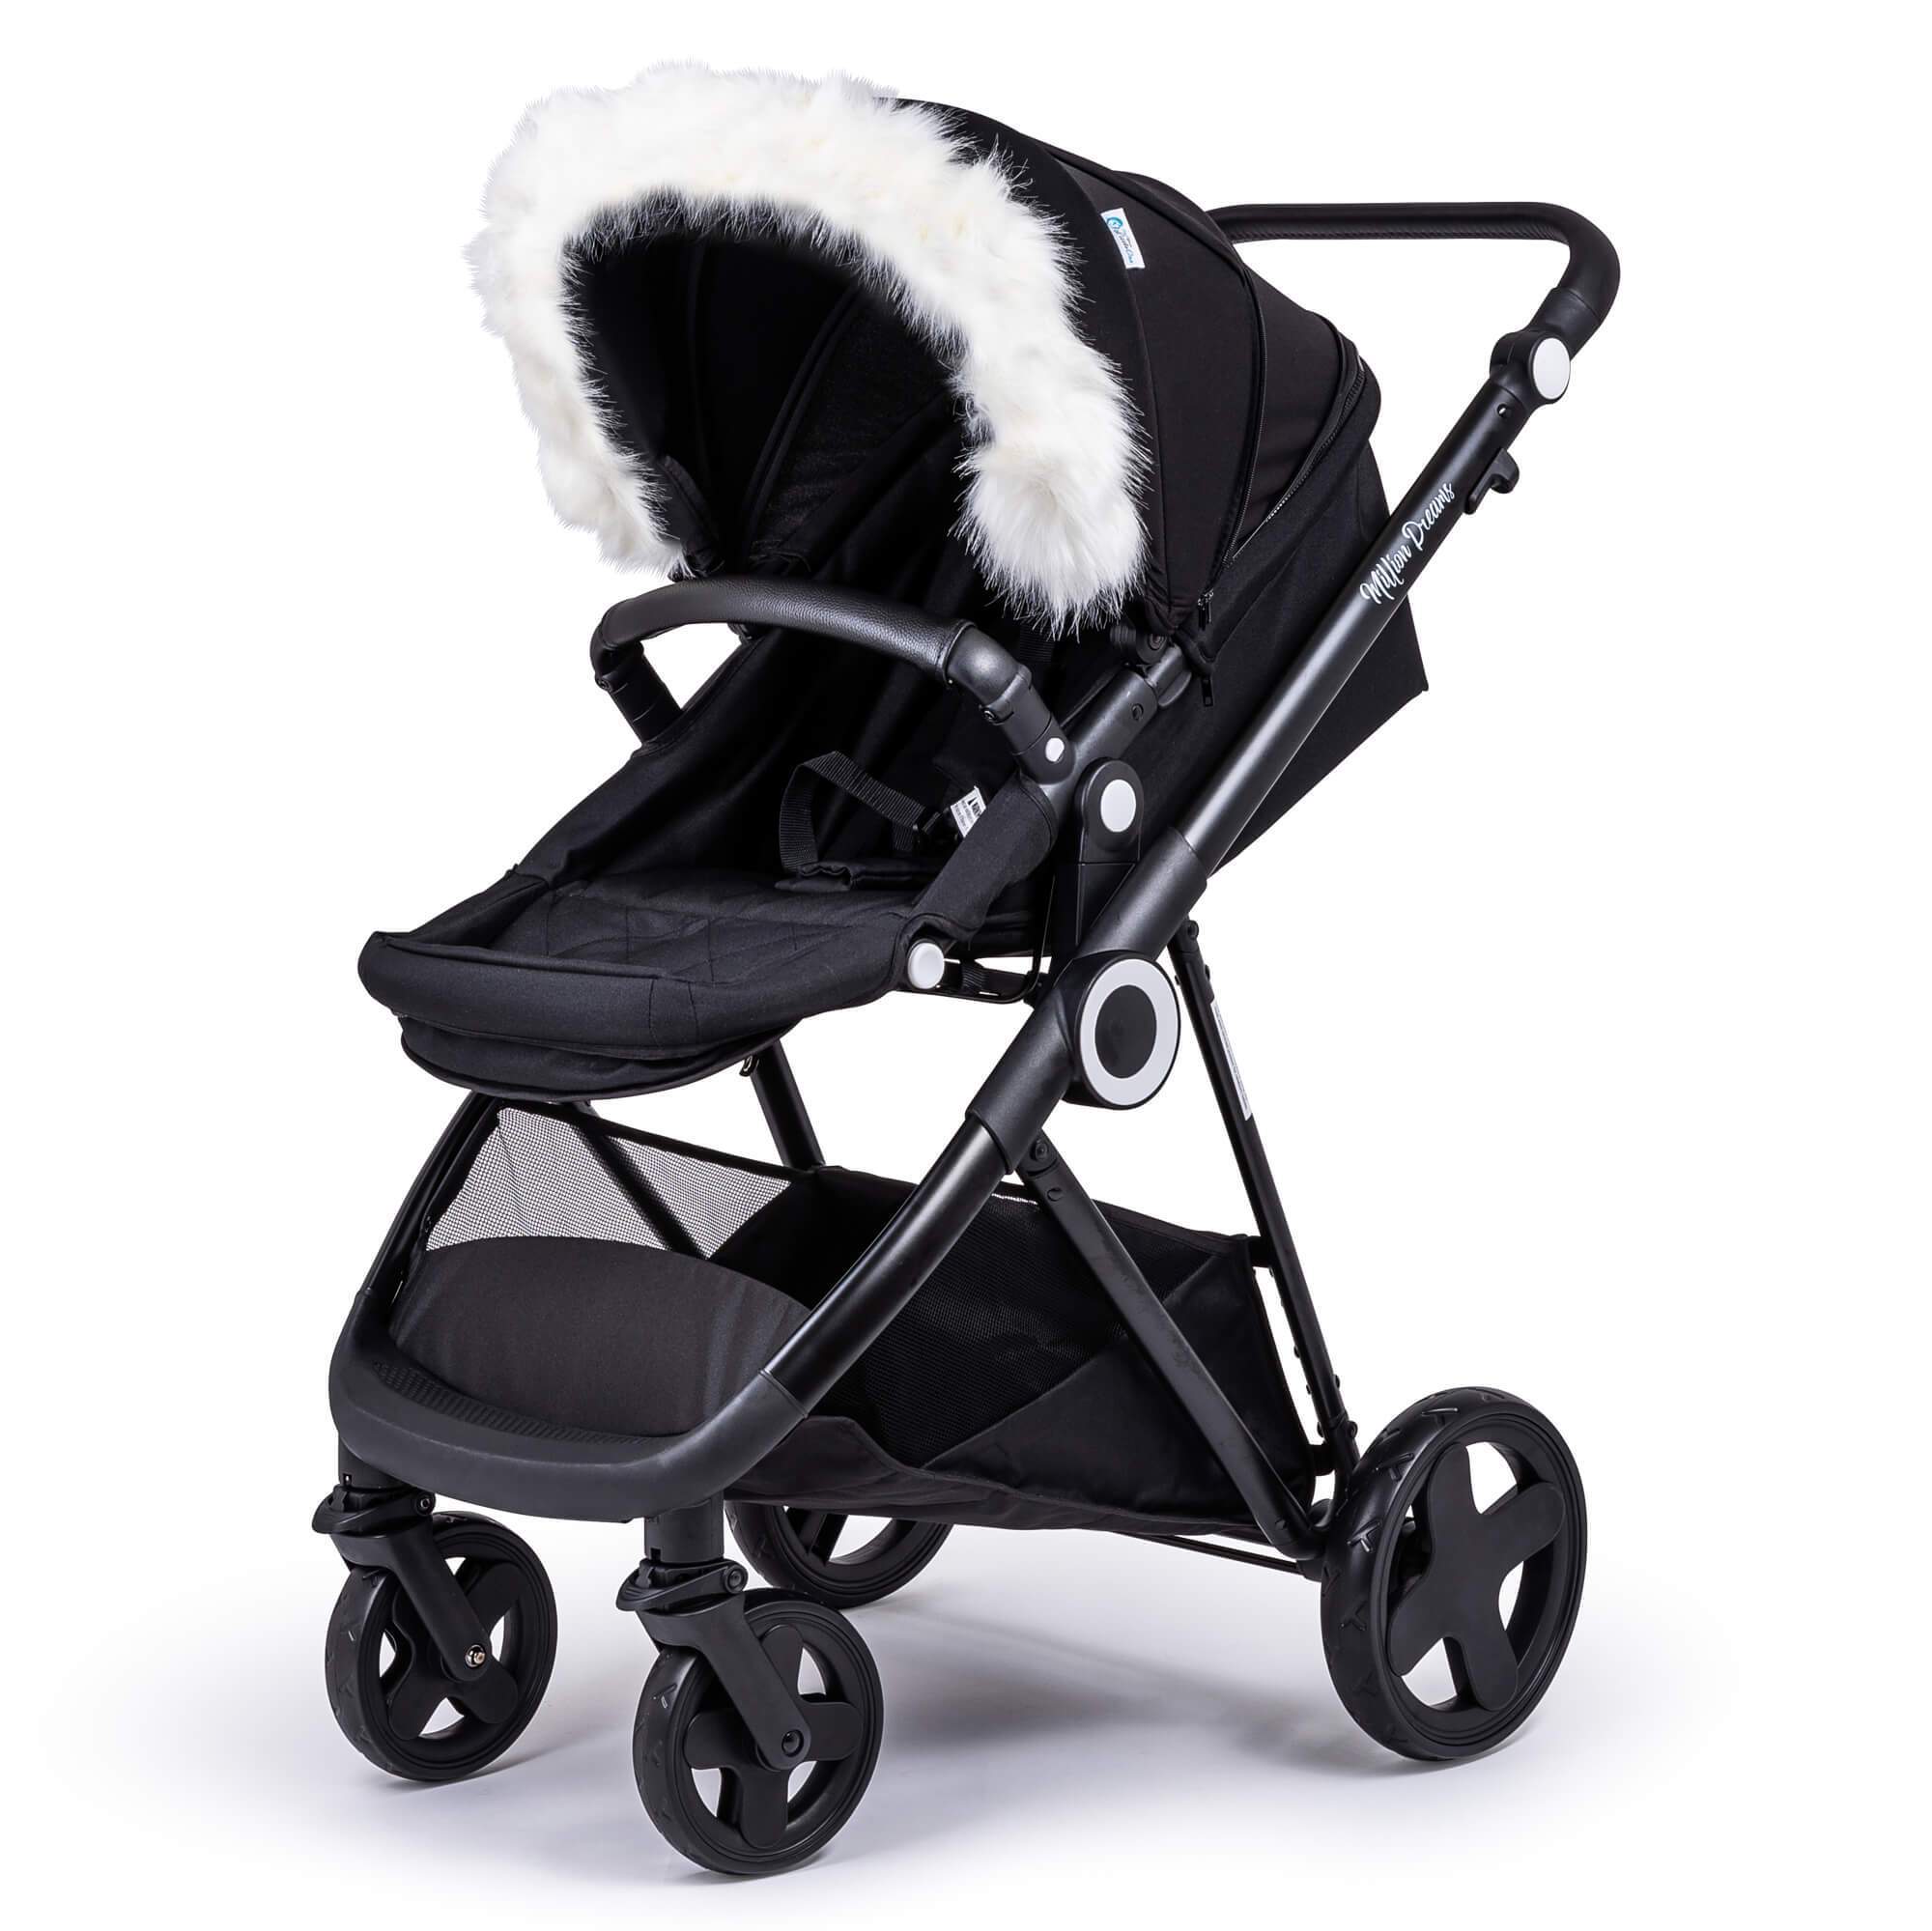 Pram Fur Hood Trim Attachment For Pushchair Compatible with Ickle Bubba - White / Fits All Models | For Your Little One